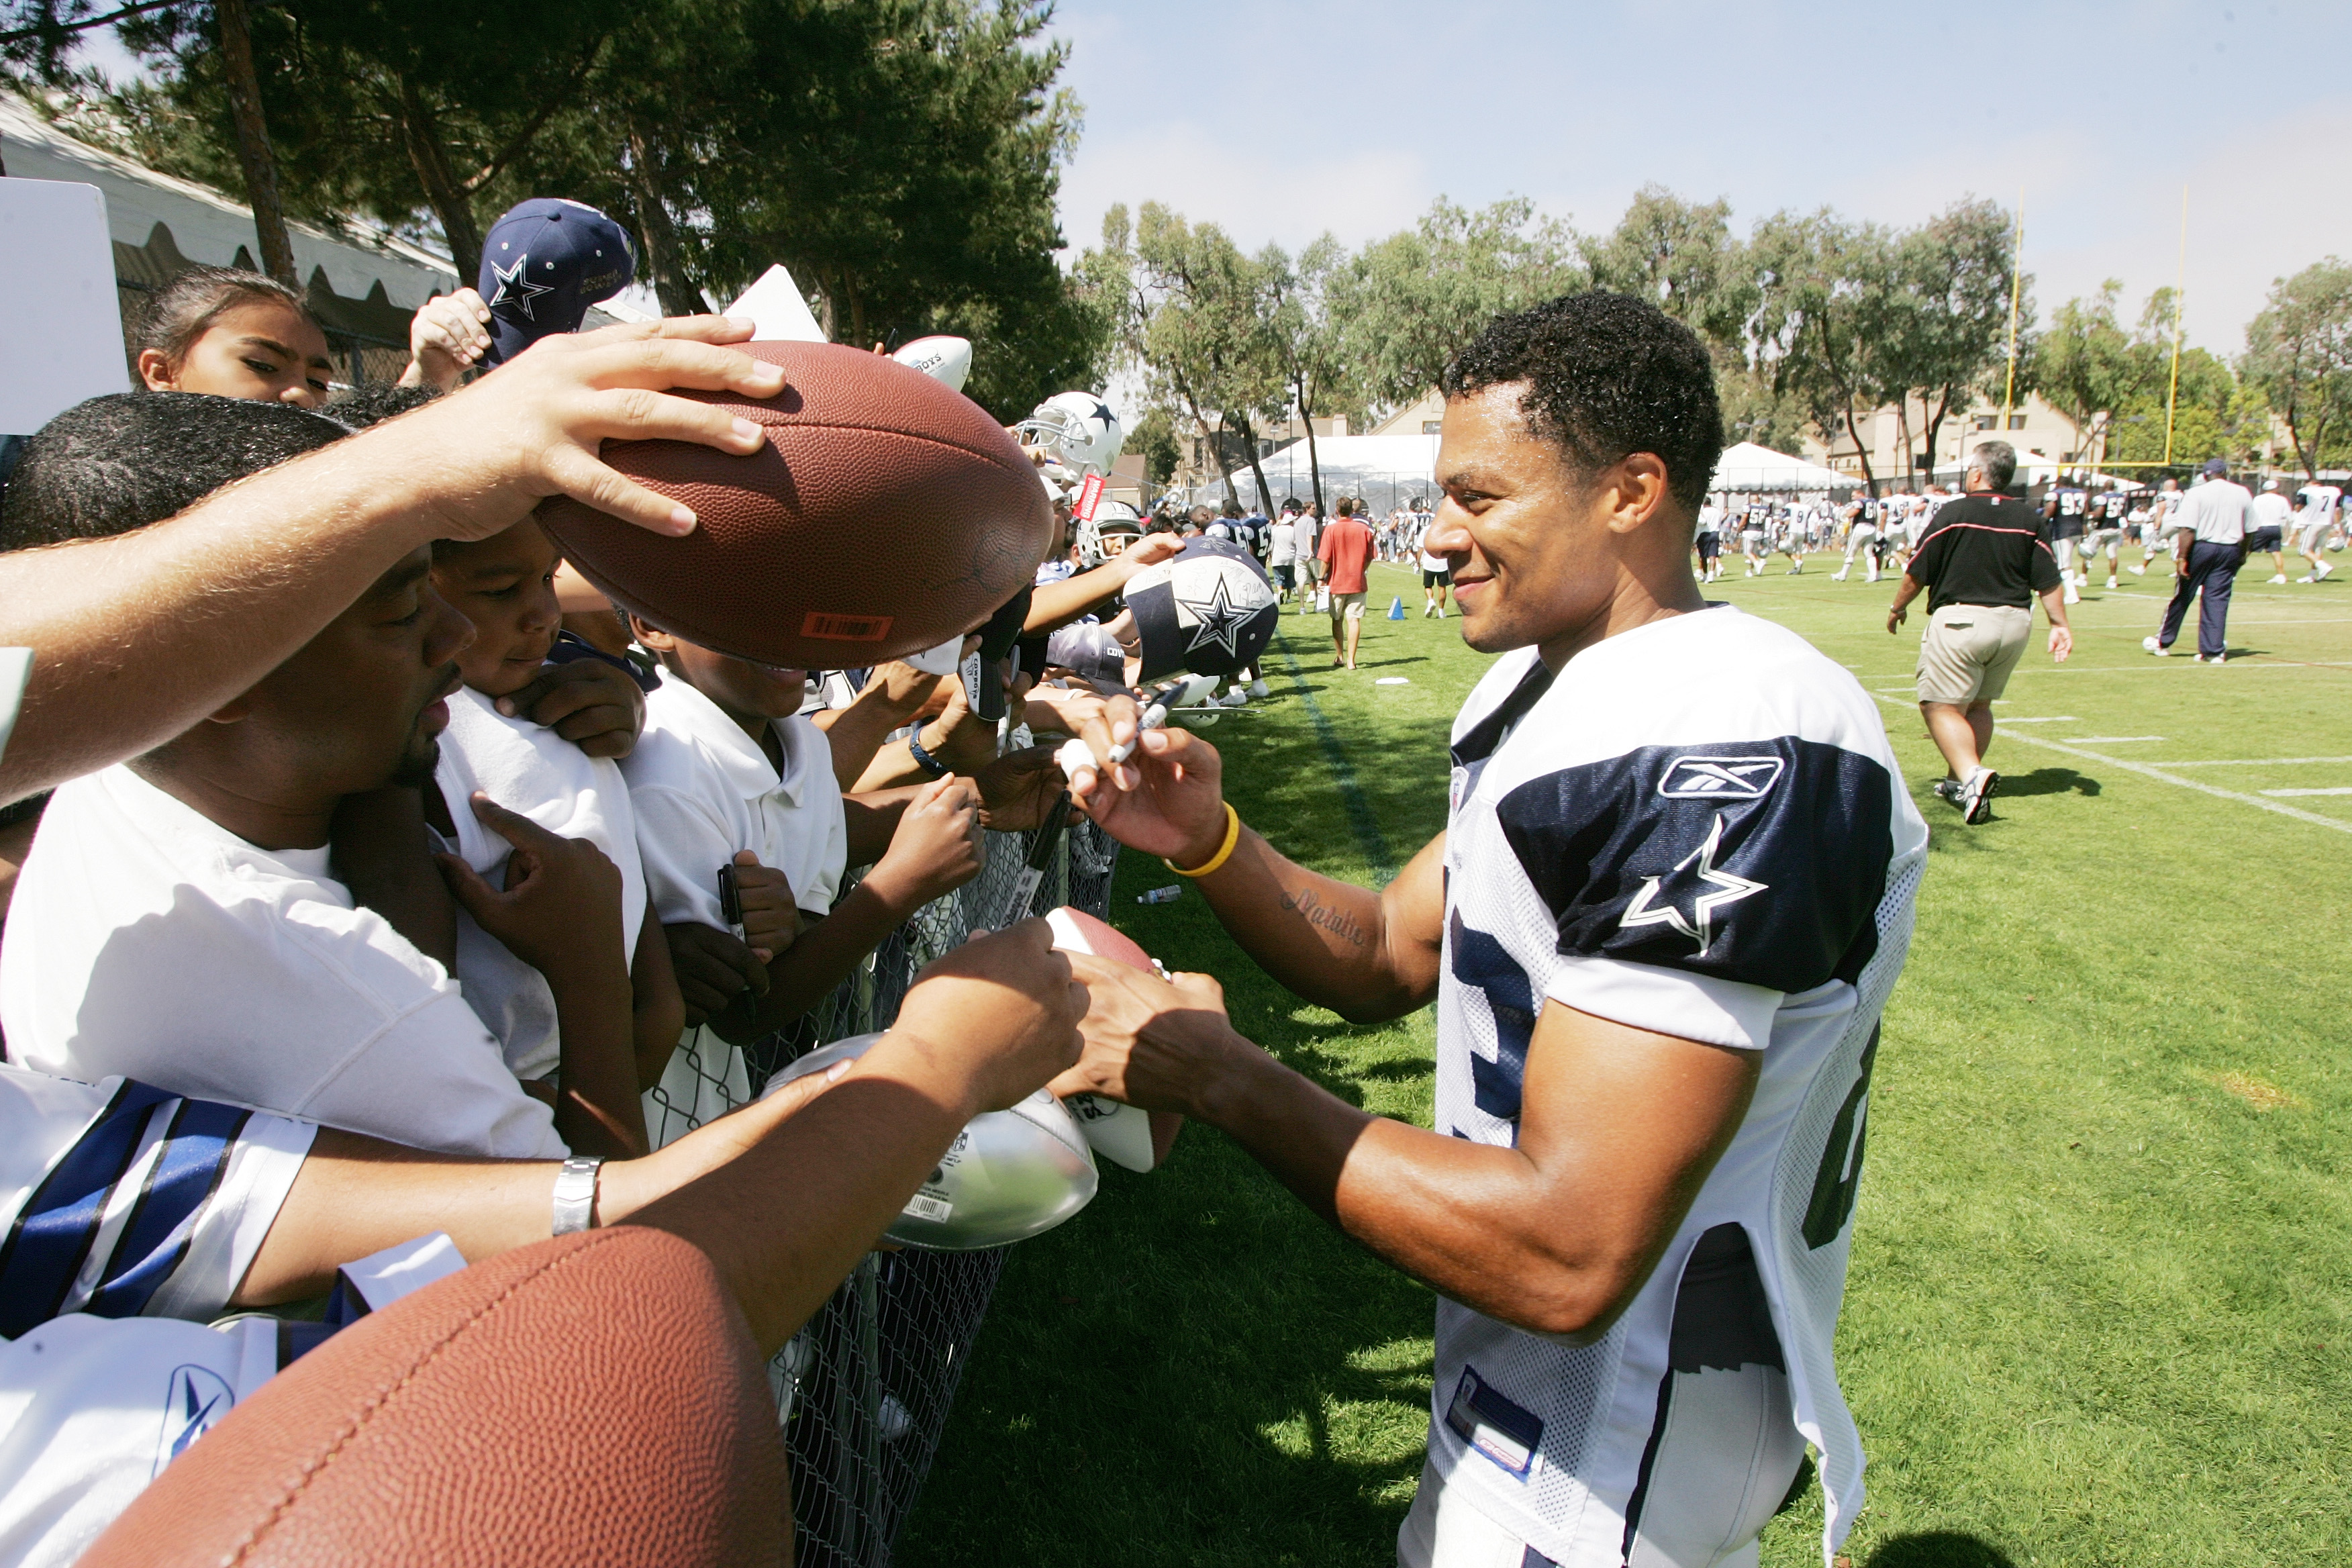 Dallas Cowboys wide receiver Terry Glenn covers up the ball after